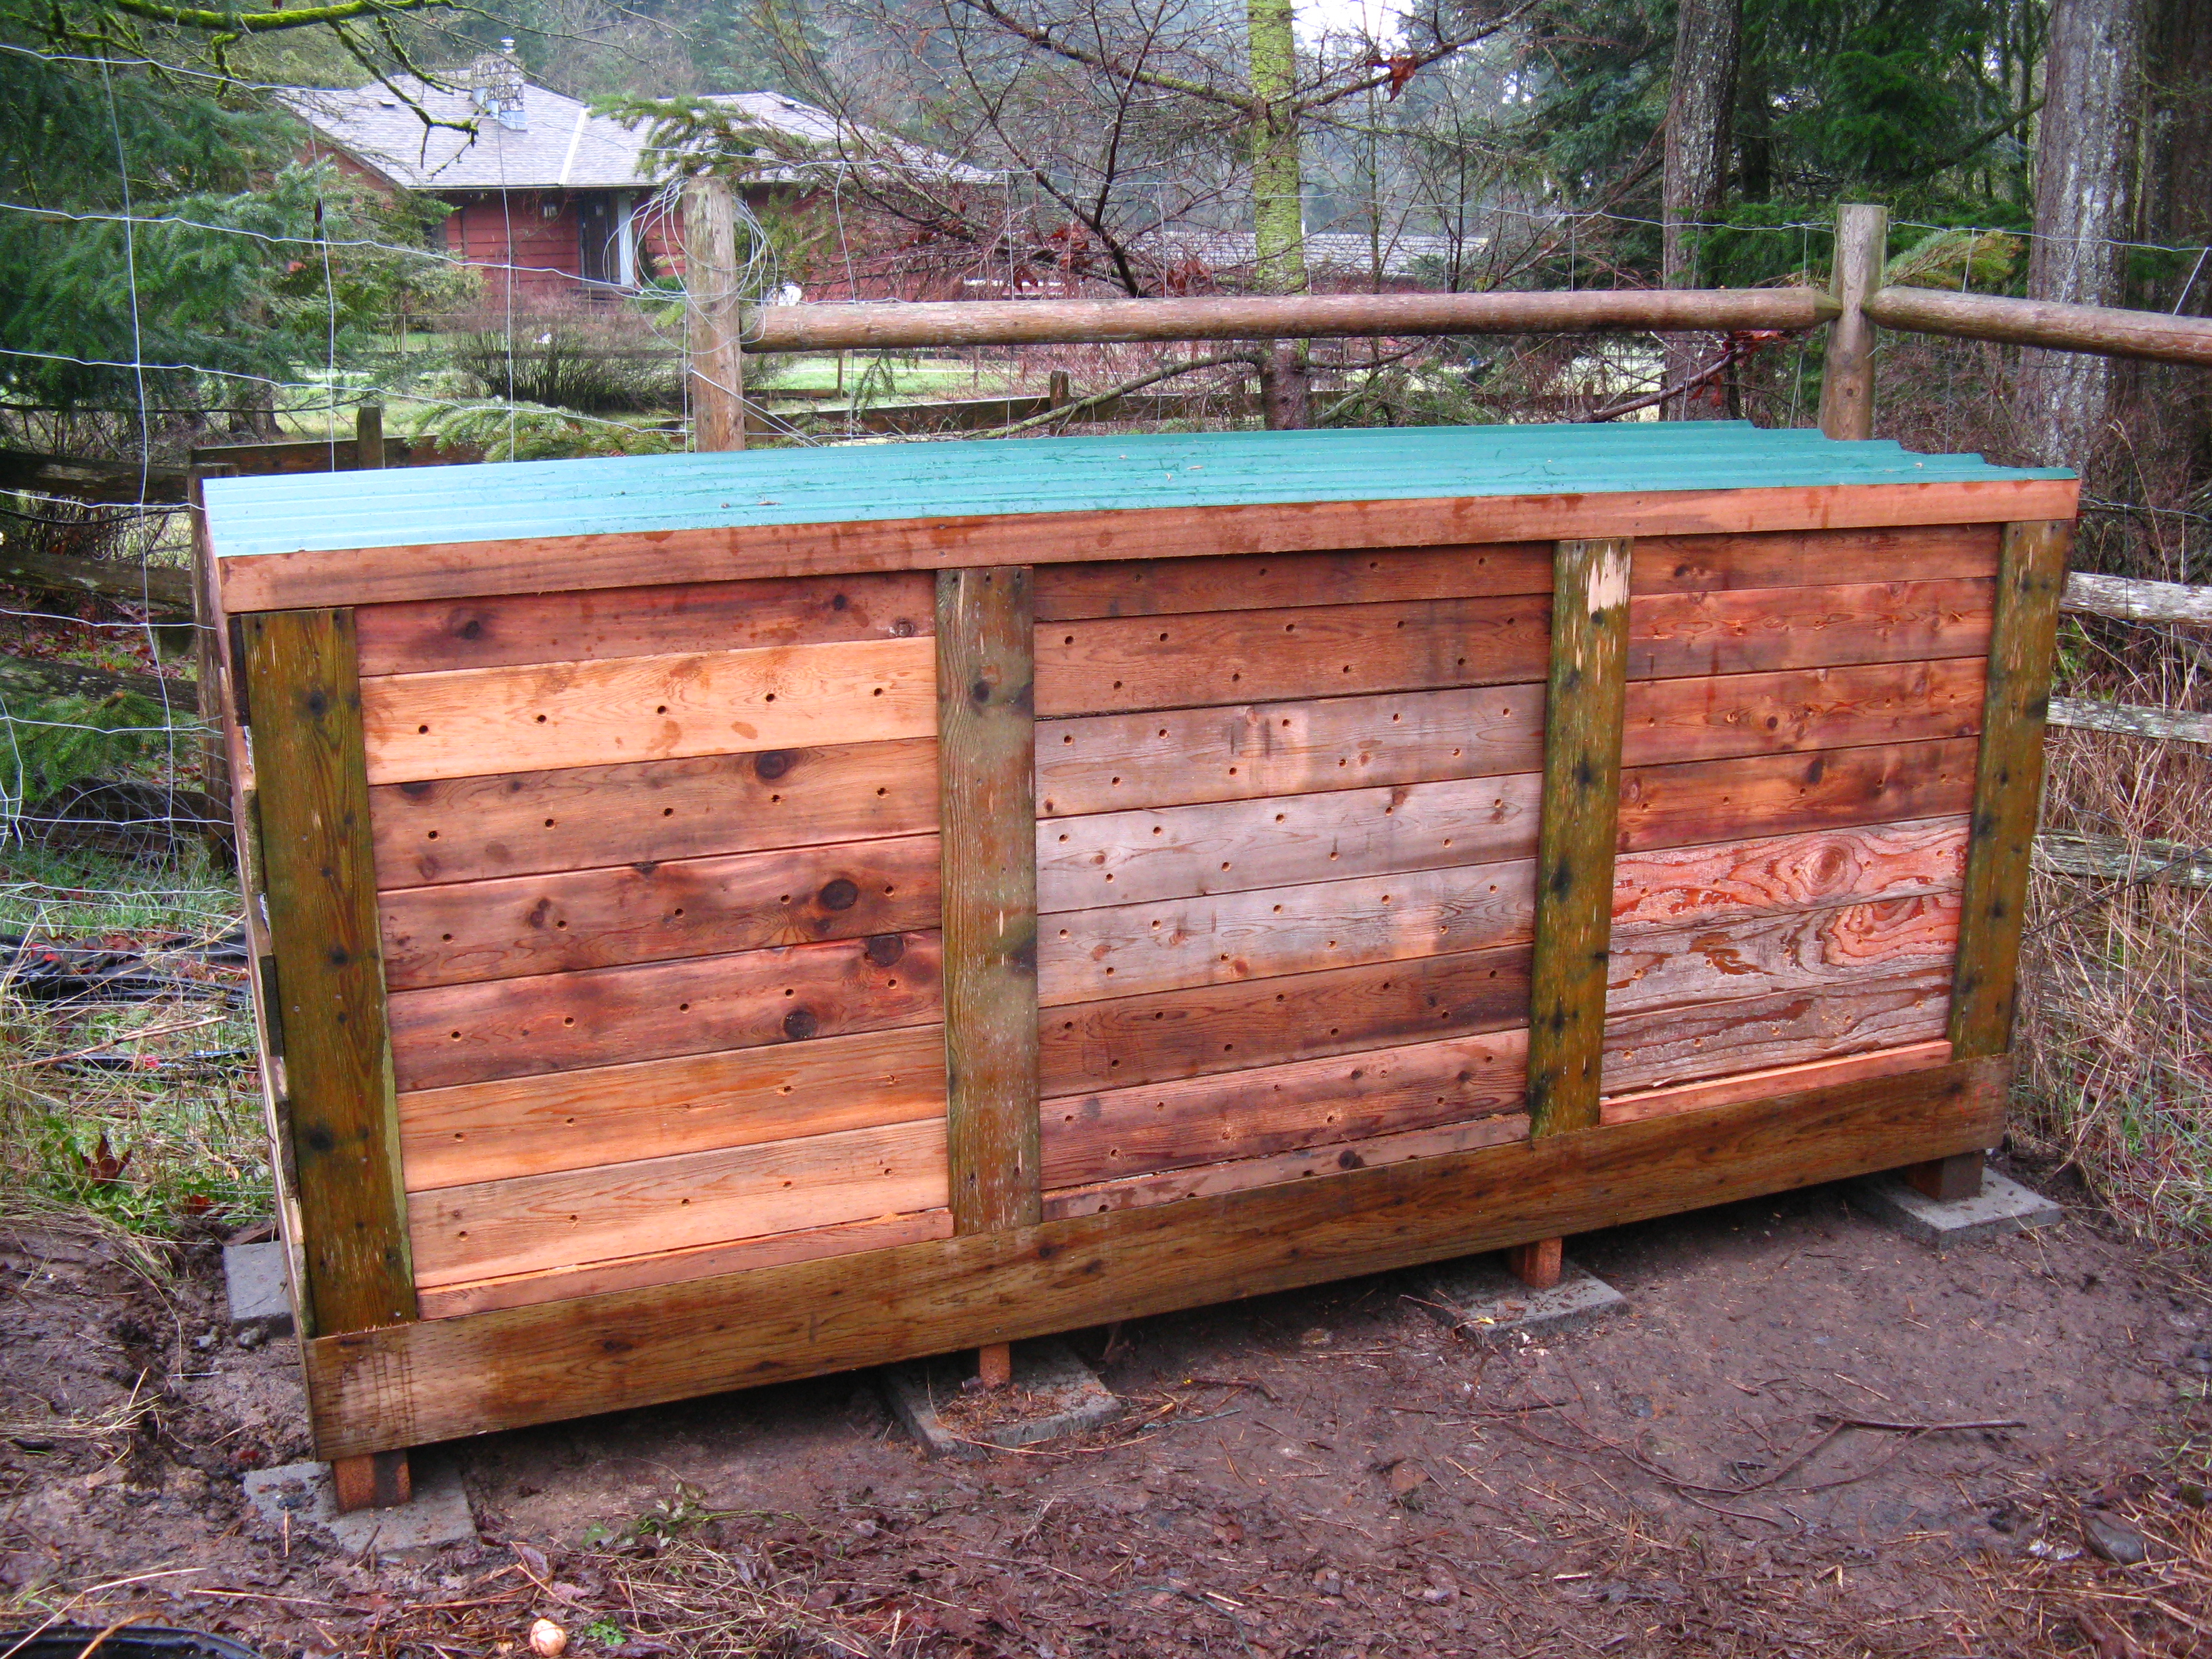 Build a 3 Bay Compost Bin STEP by STEP 